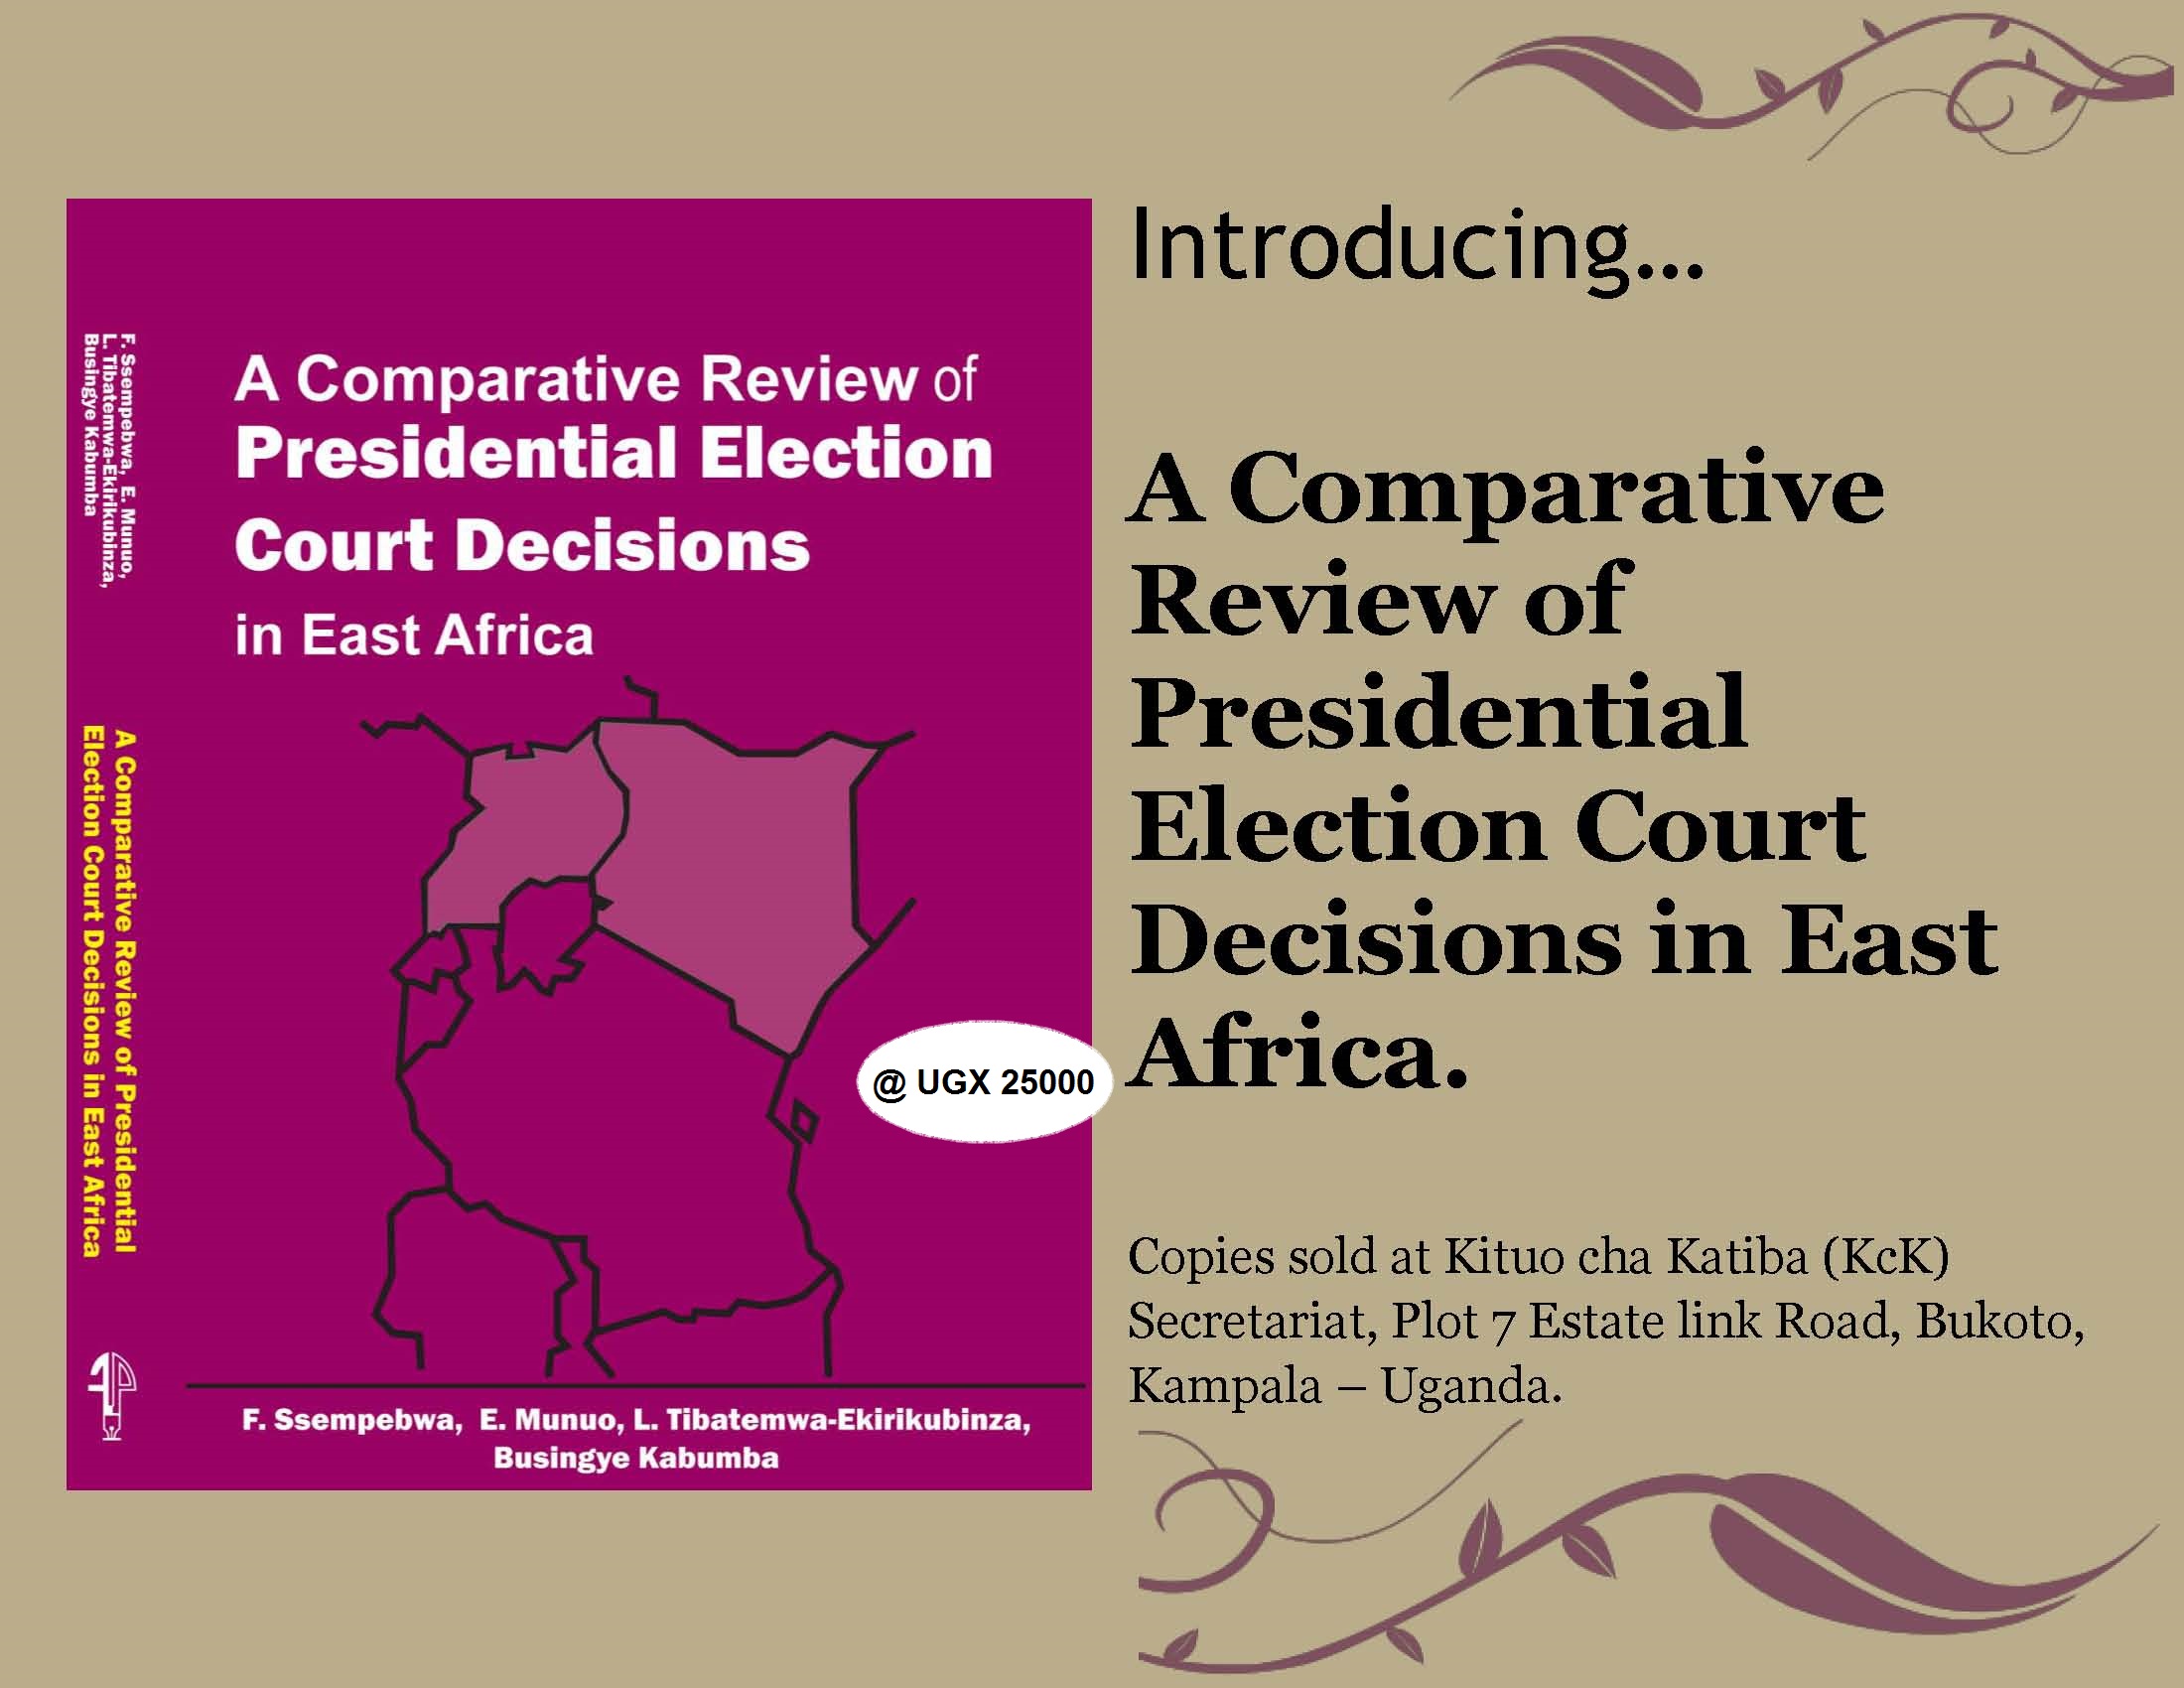 Publications: A Comparative Review of Presidential Election Court Decisions in East Africa